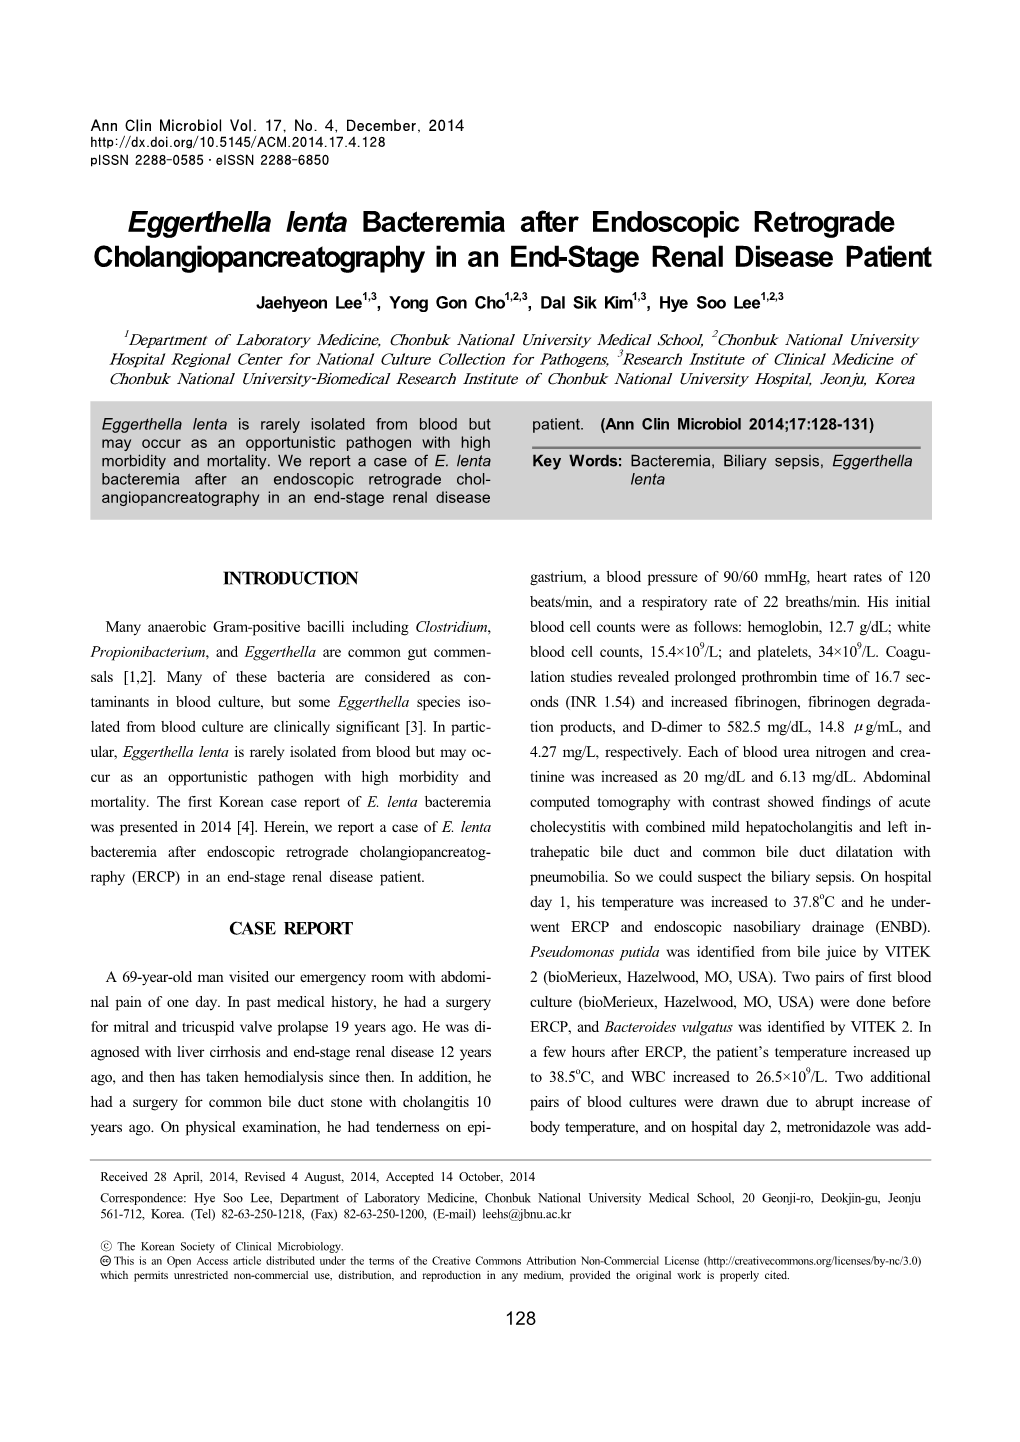 Eggerthella Lenta Bacteremia After Endoscopic Retrograde Cholangiopancreatography in an End-Stage Renal Disease Patient